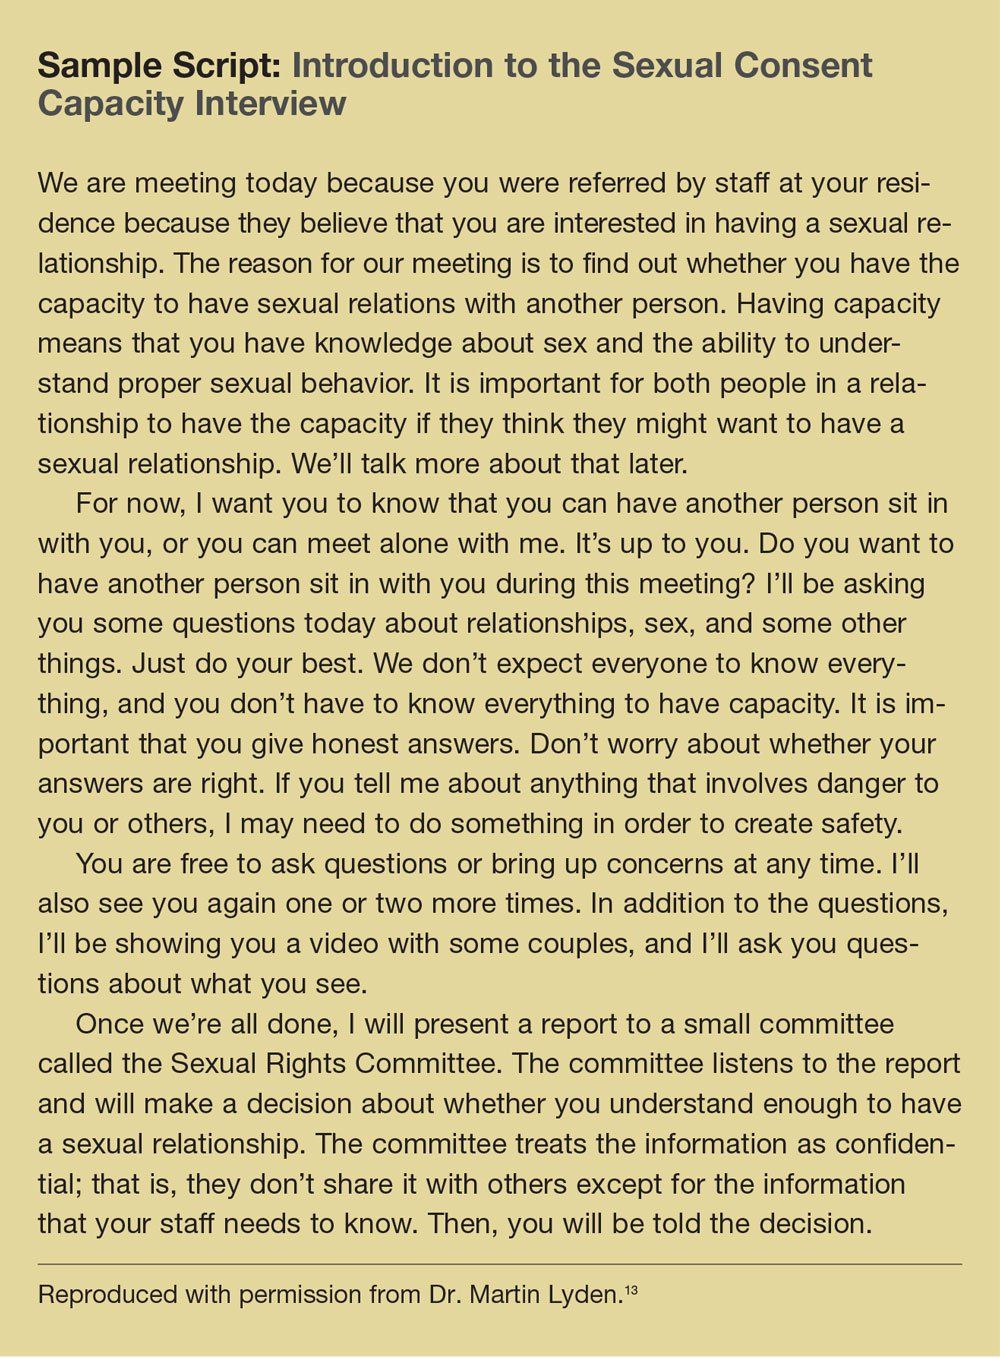 Sample Script: Introduction to the Sexual Consent Capacity Interview